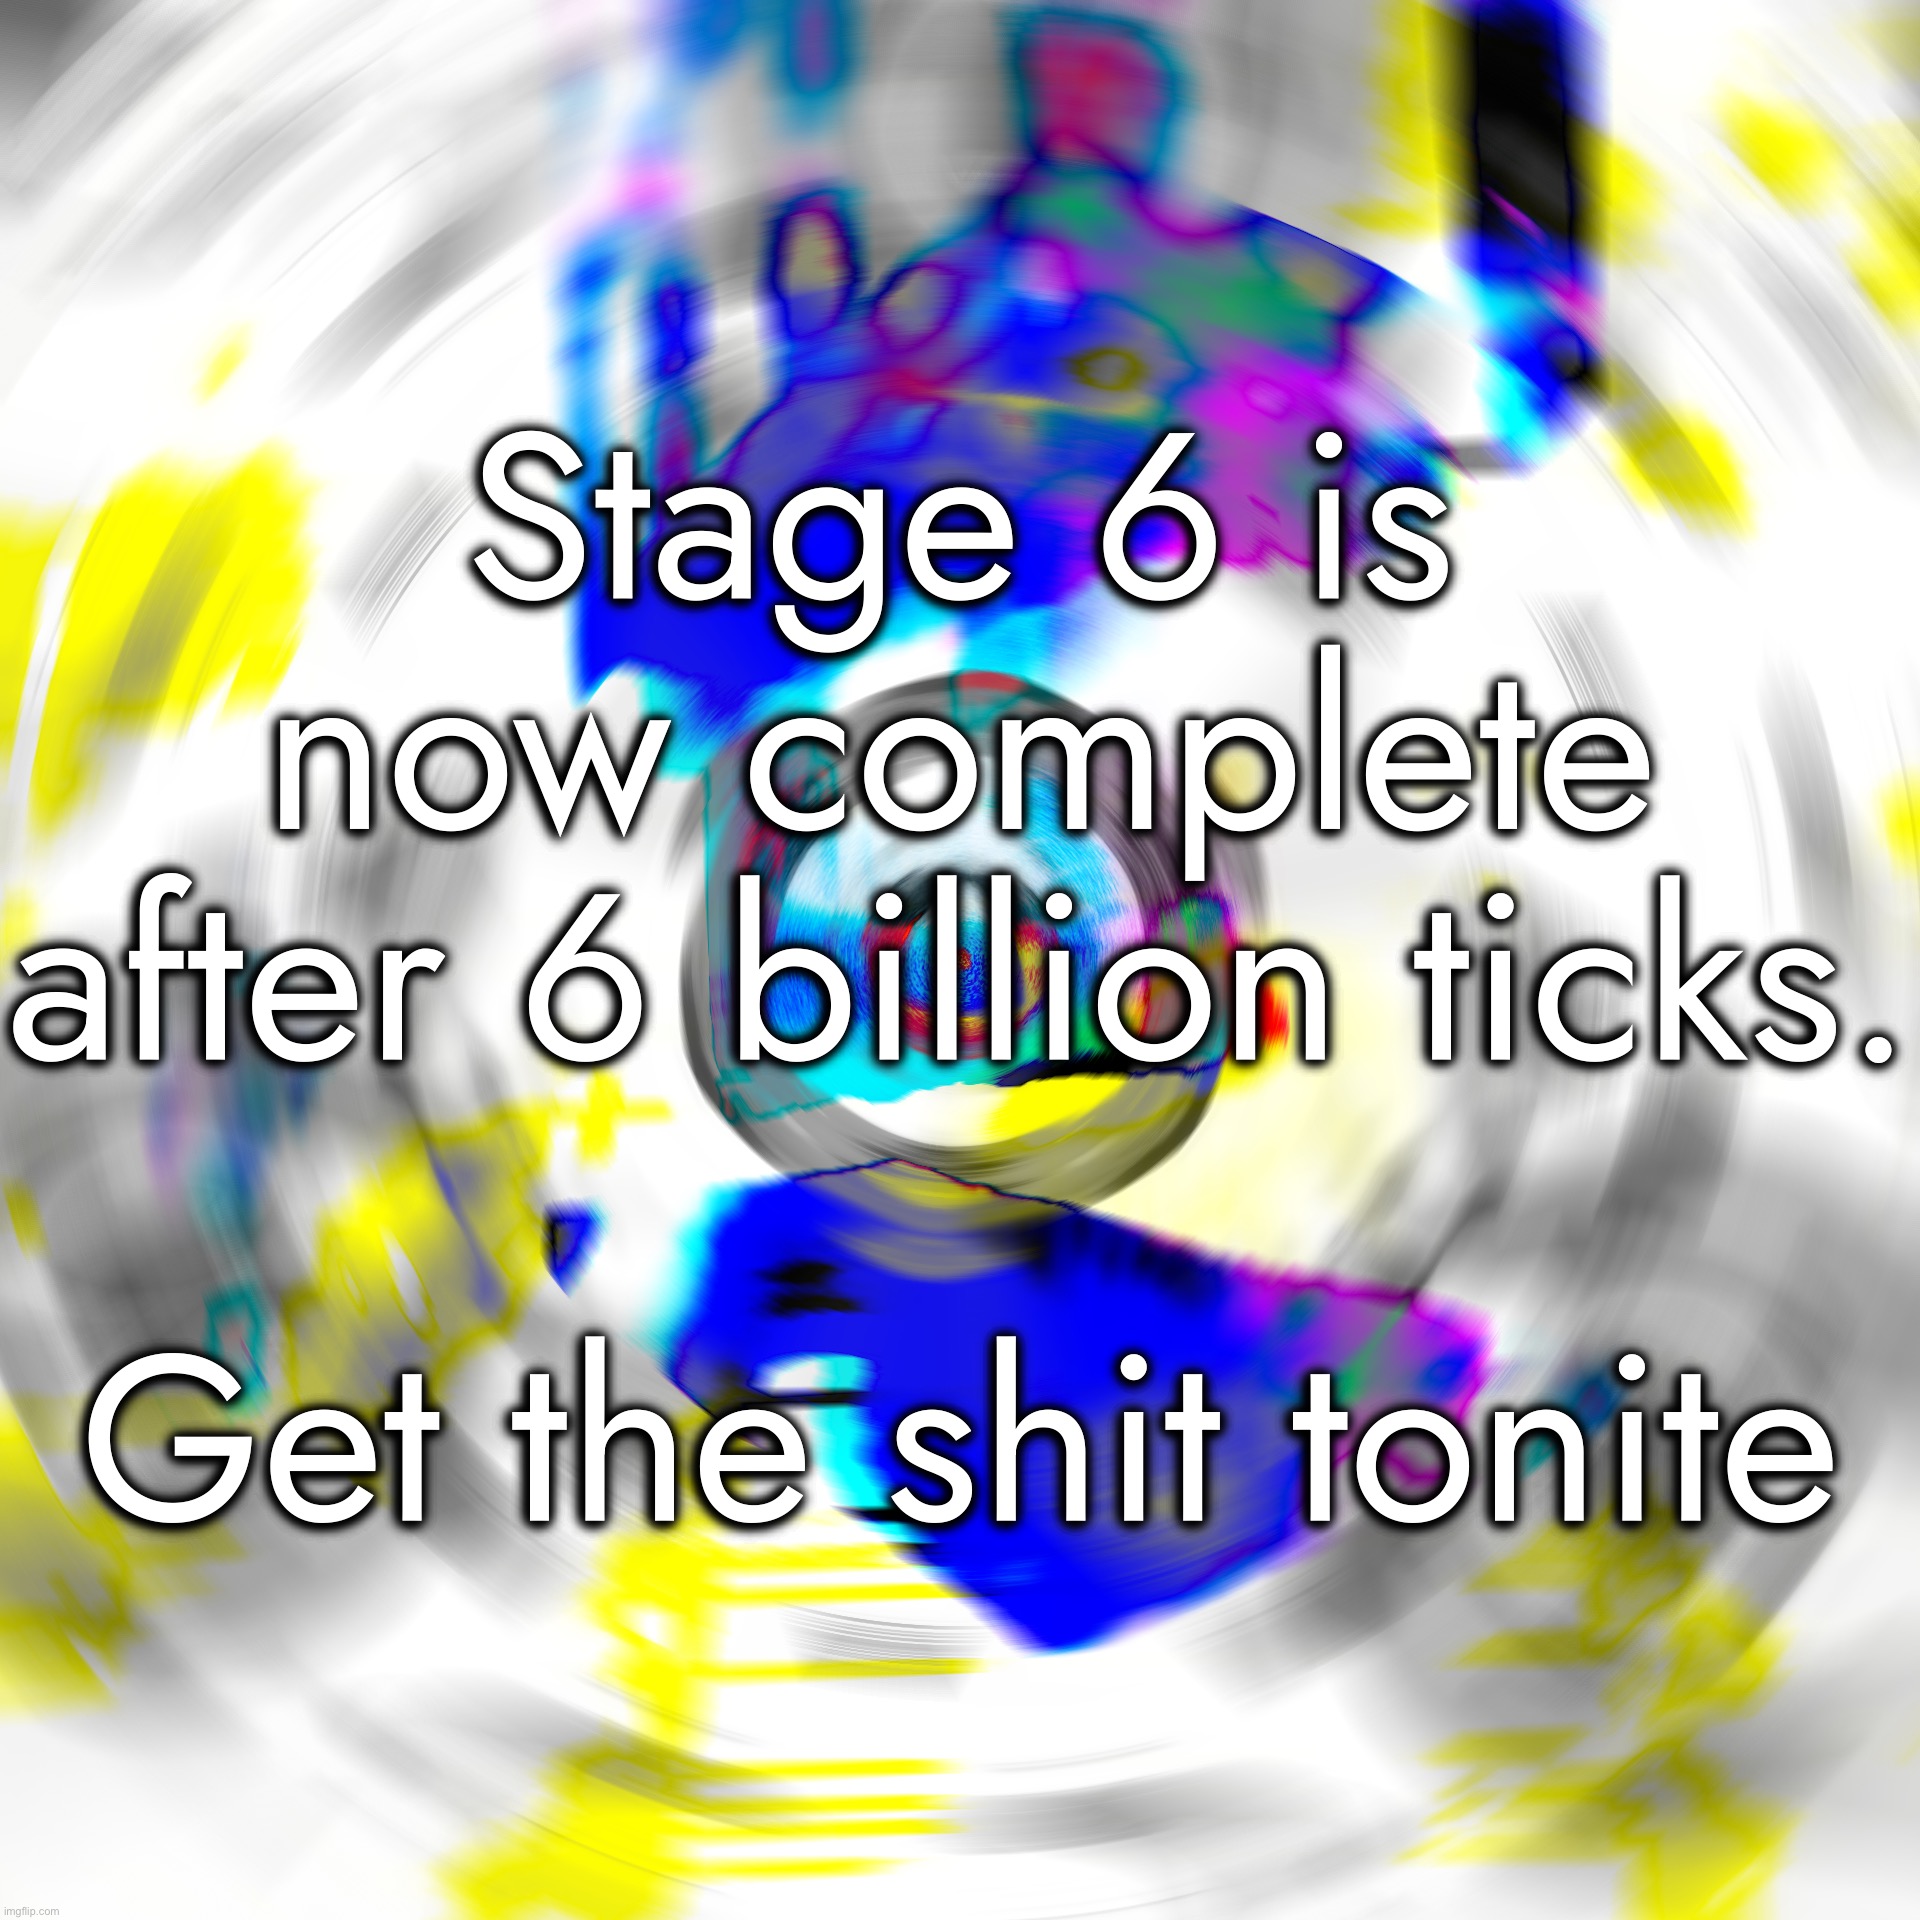 NOTE: I was originally considering ending the album here, but decided to start 1 more stage later or whatever xddddf. | Stage 6 is now complete after 6 billion ticks.
 
Get the shit tonite | made w/ Imgflip meme maker